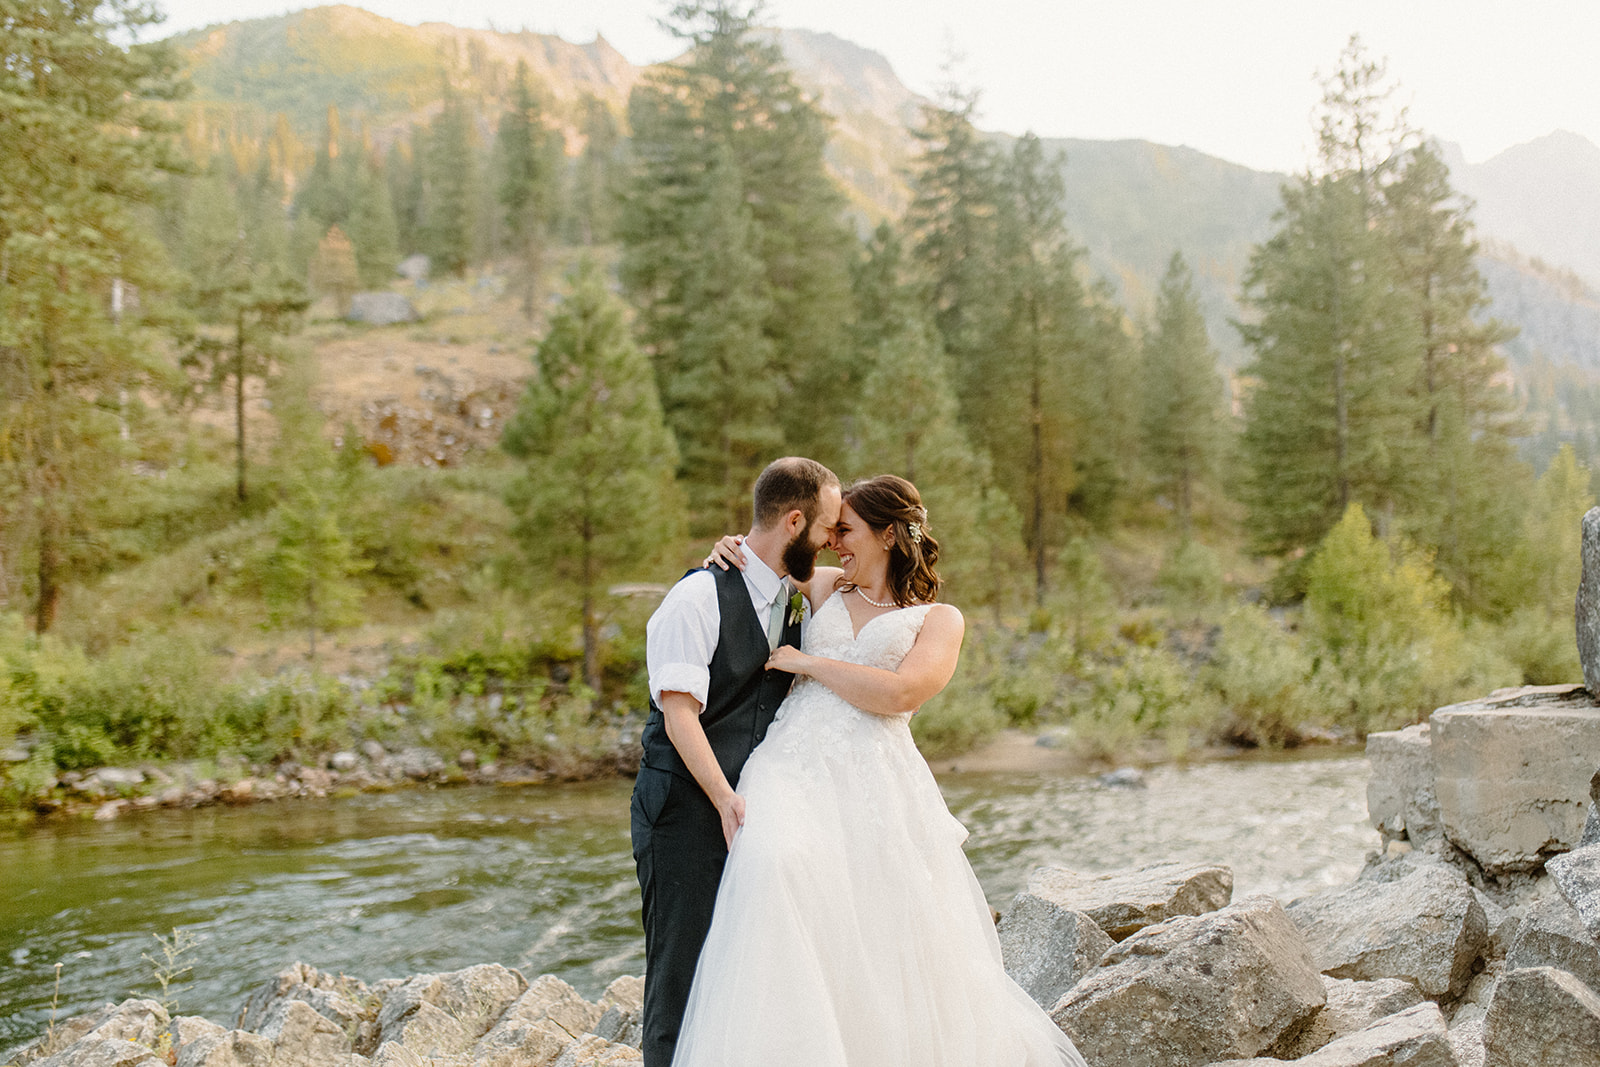 A Romantic Outdoor Wedding Day At The Sleeping Lady Resort